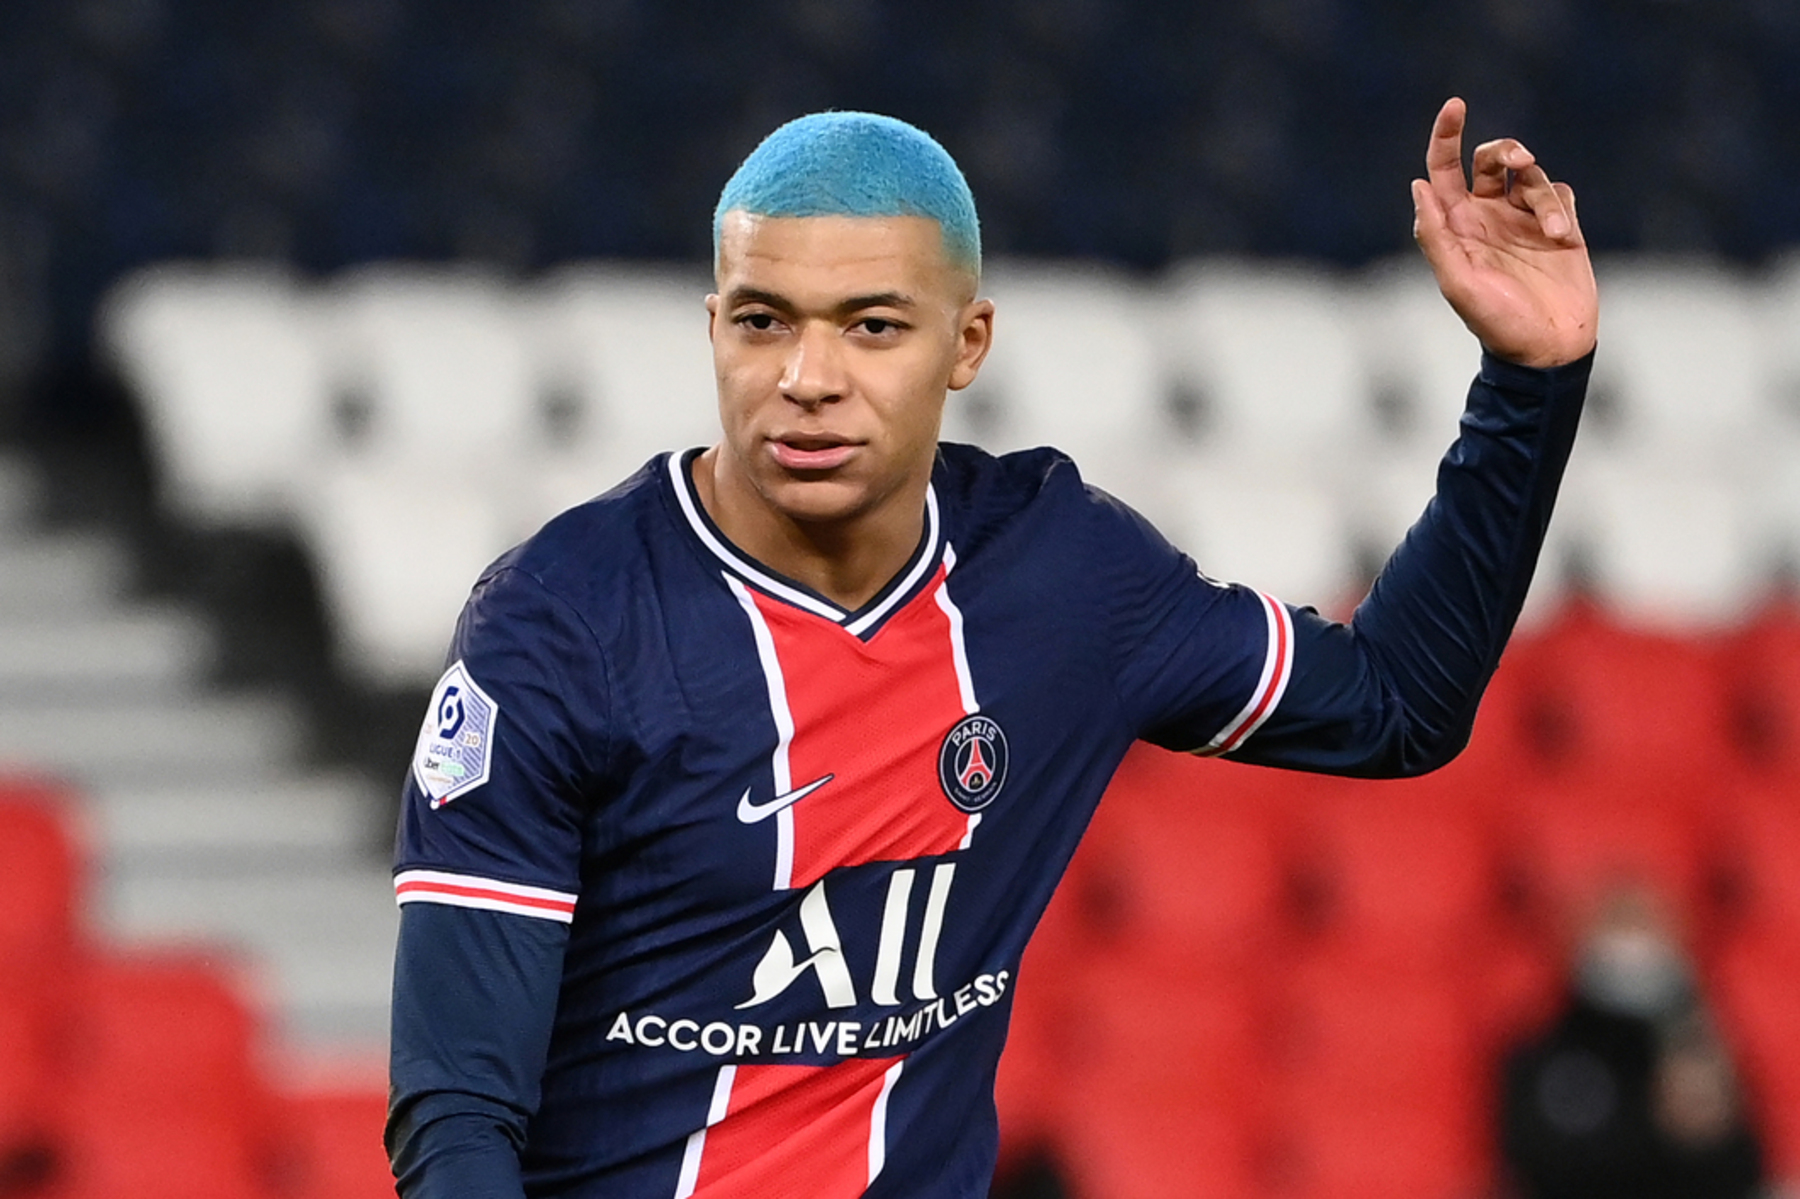 Mbappe 'fully committed' to psg, insists pochettino. 